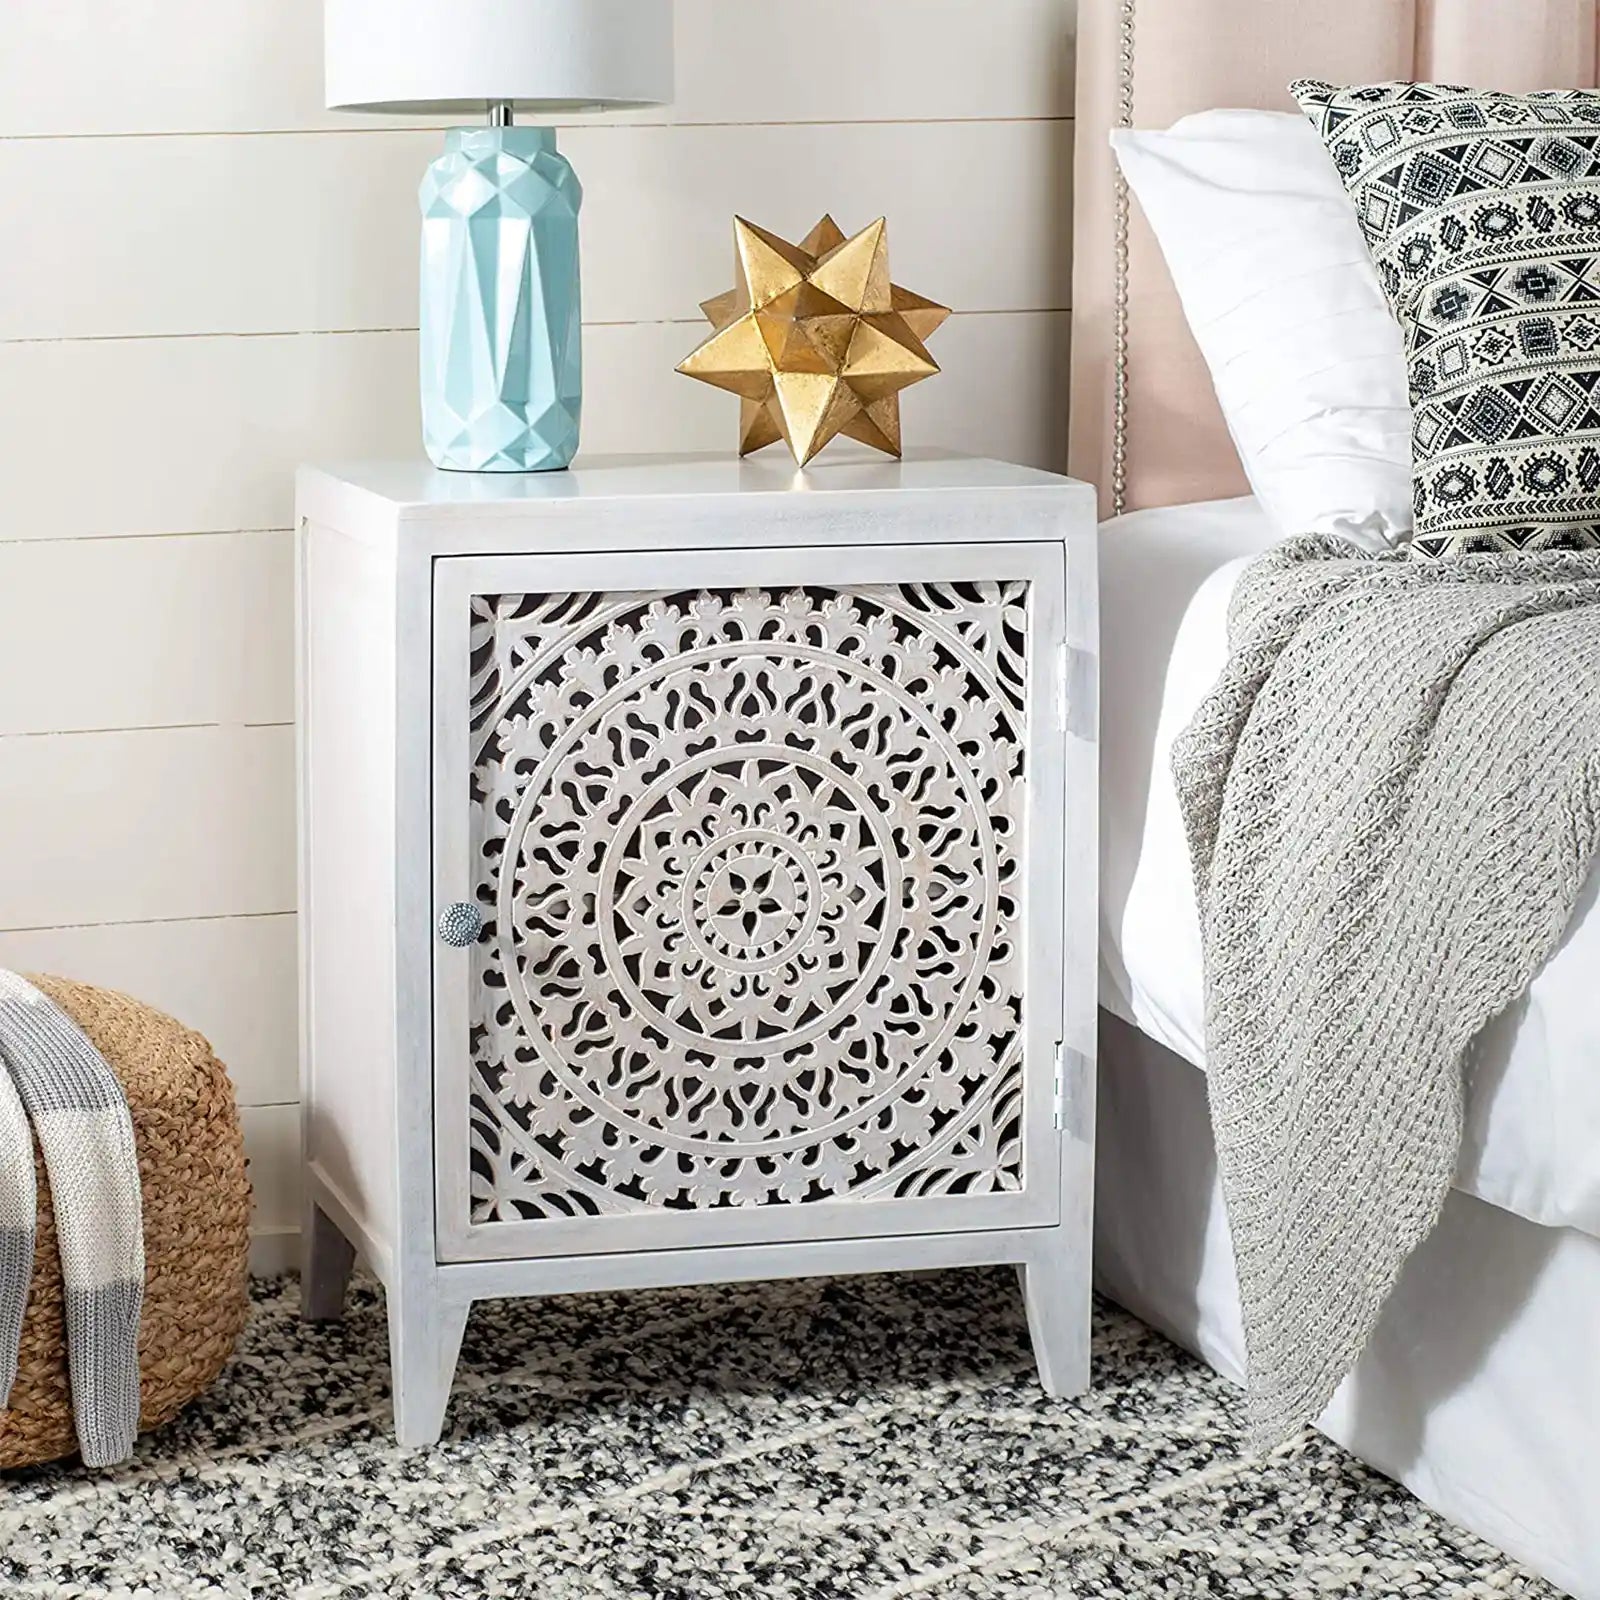 White Washed 1-Door Carved Nightstand